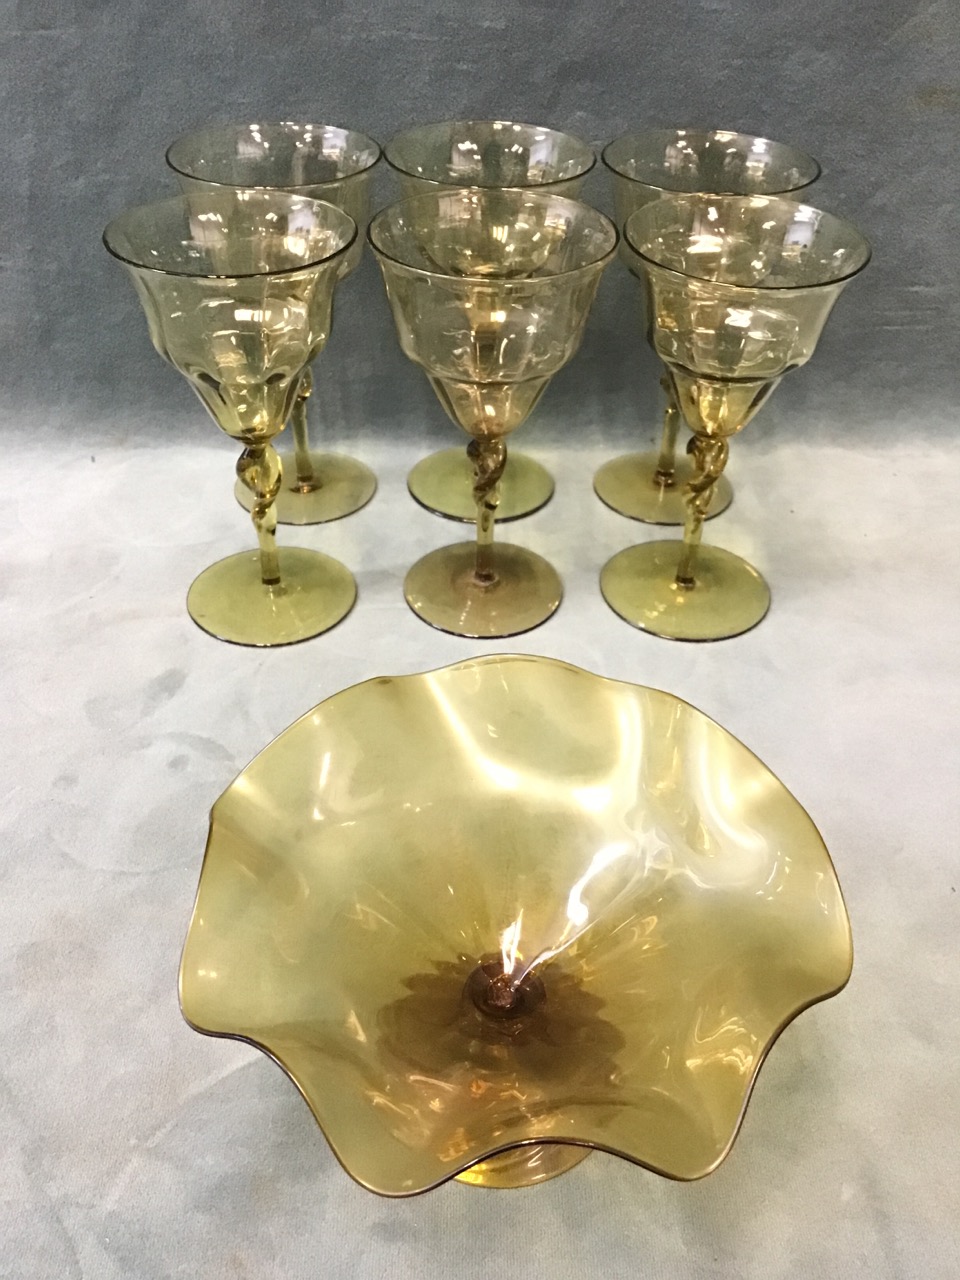 A set of six Victorian wine glasses by James Powell & Sons Whitefriars, design c.1860 attributed